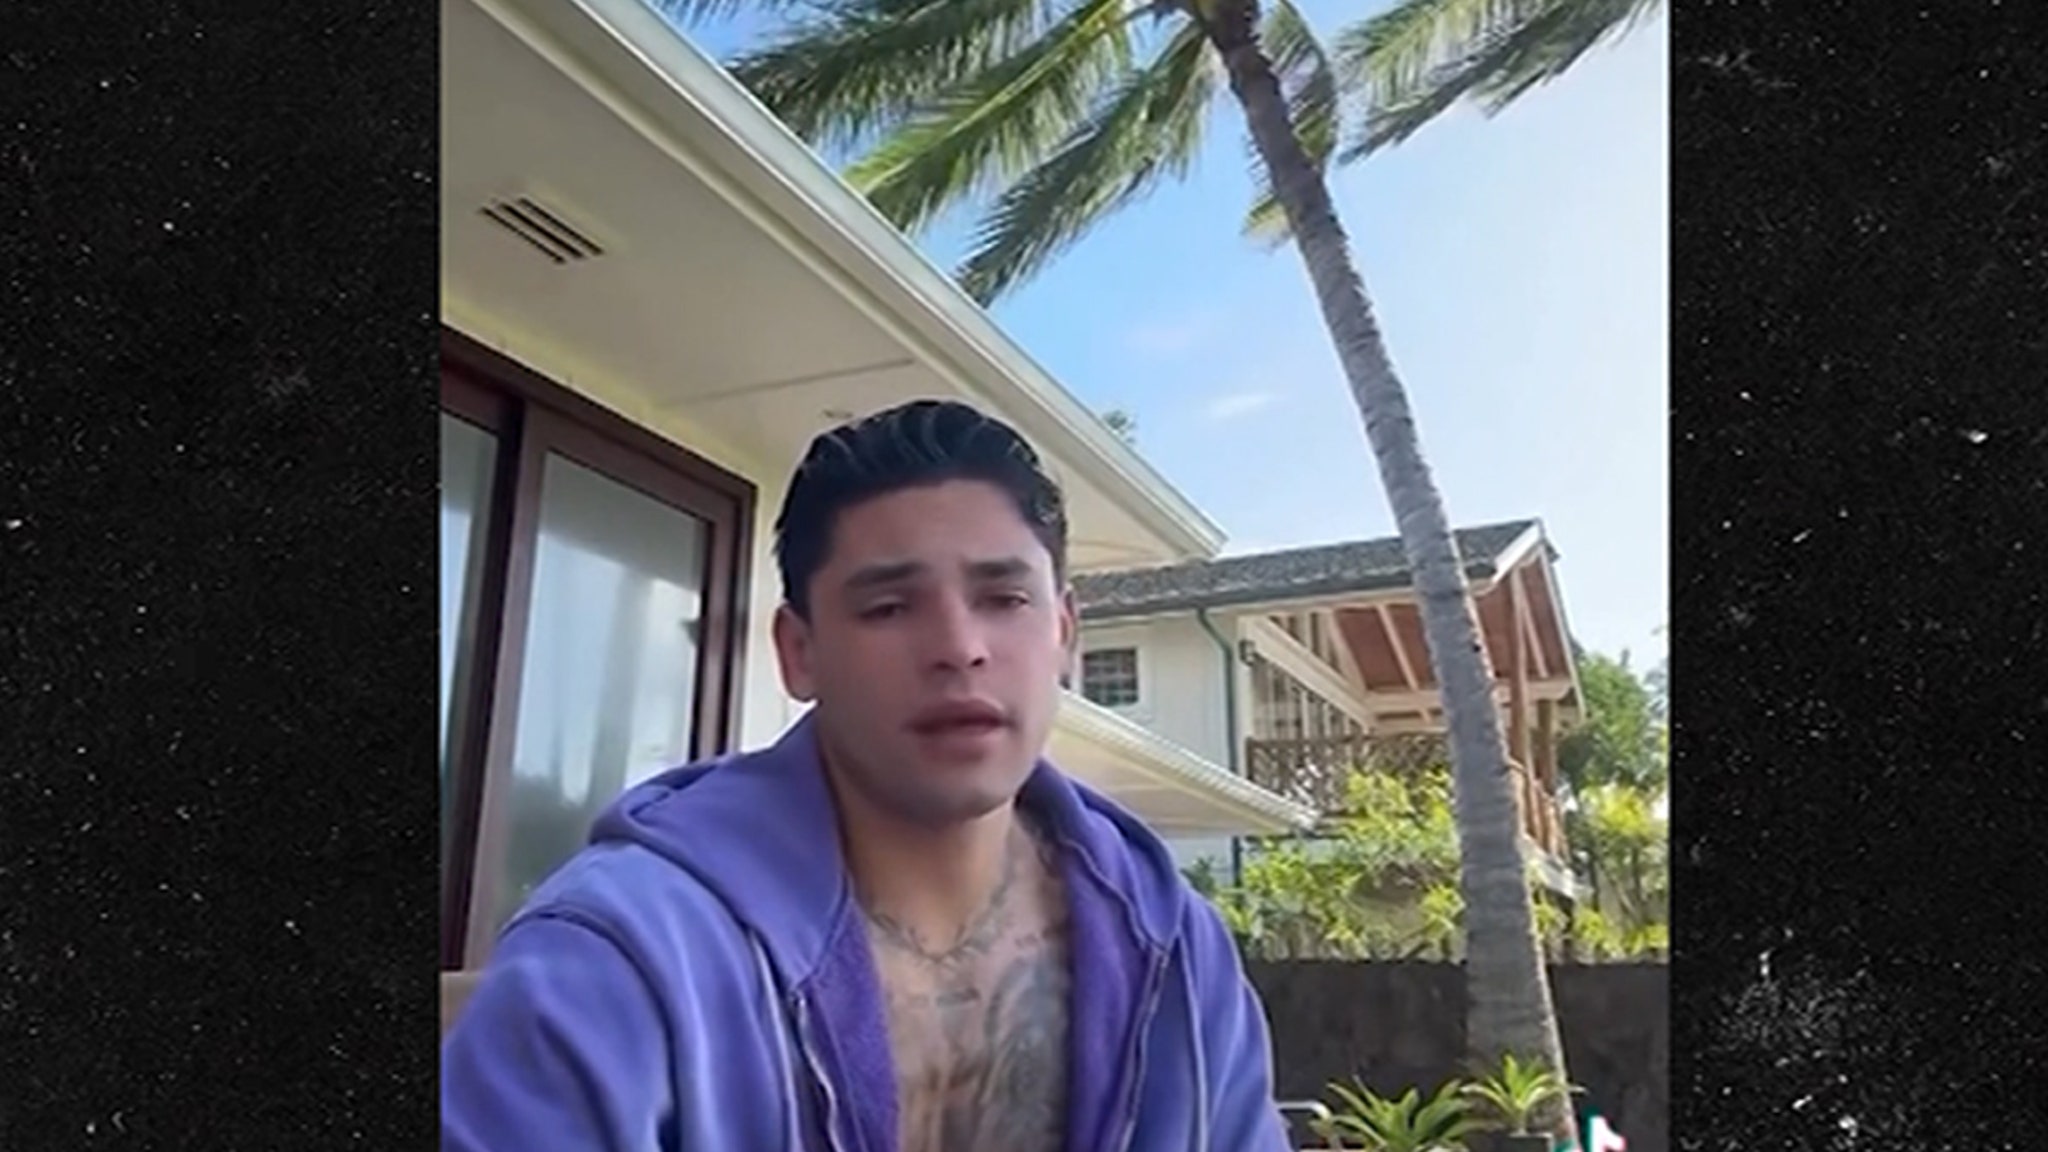 Ryan Garcia says he's going to rehab in a two-minute apology video to his ex-wife